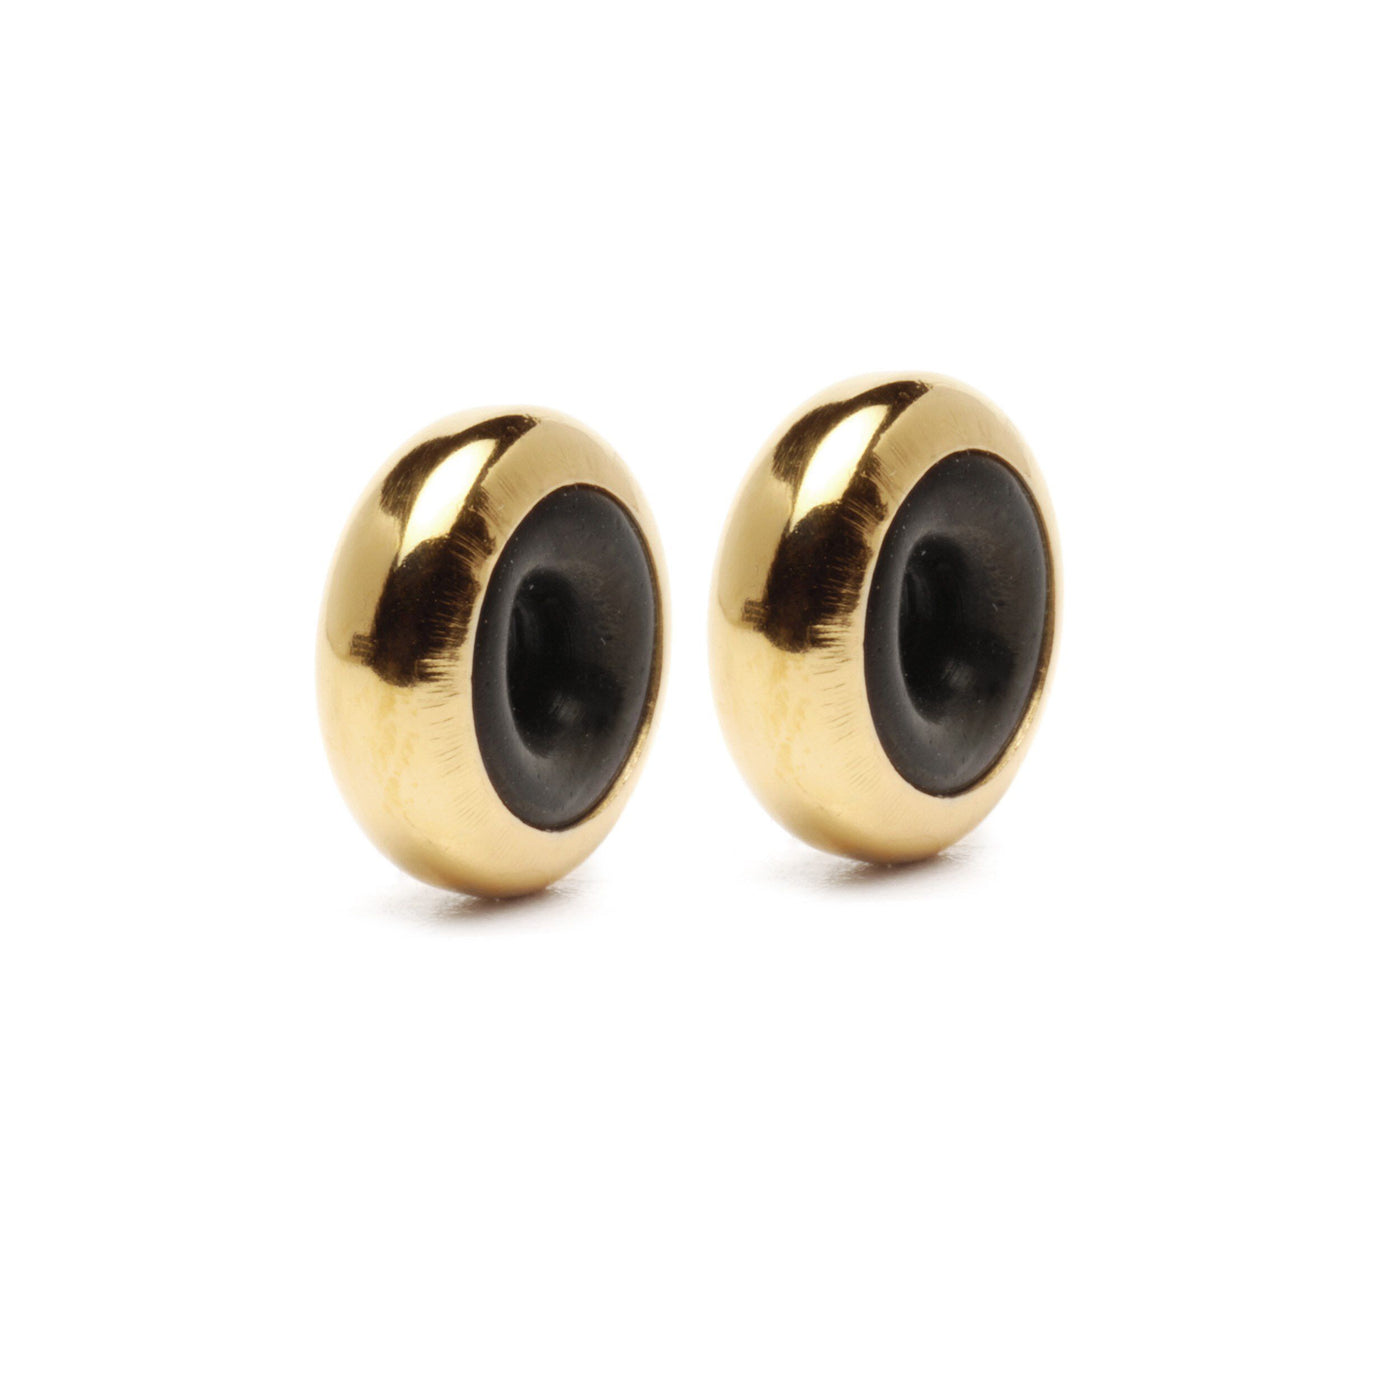 Gold Spacer (2 pcs) - Trollbeads Canada